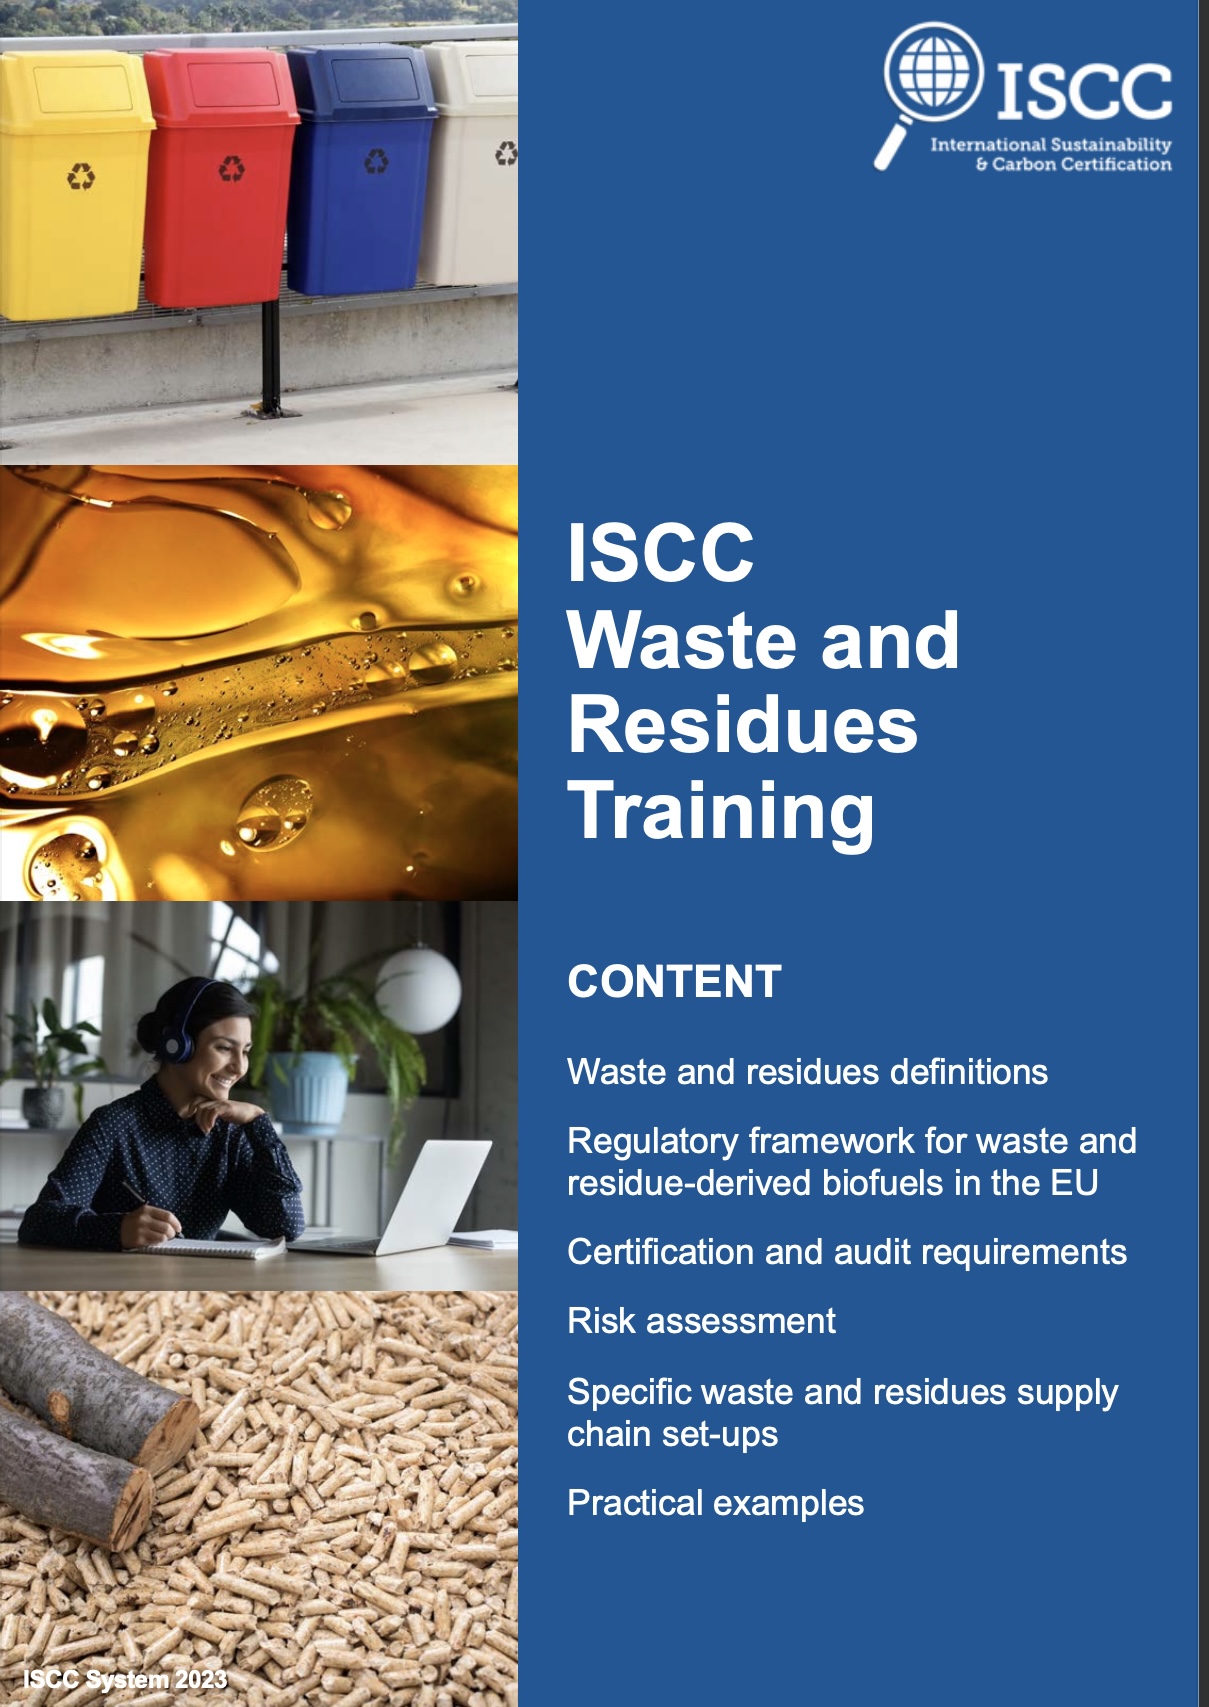 ISCC Waste and Residues Training